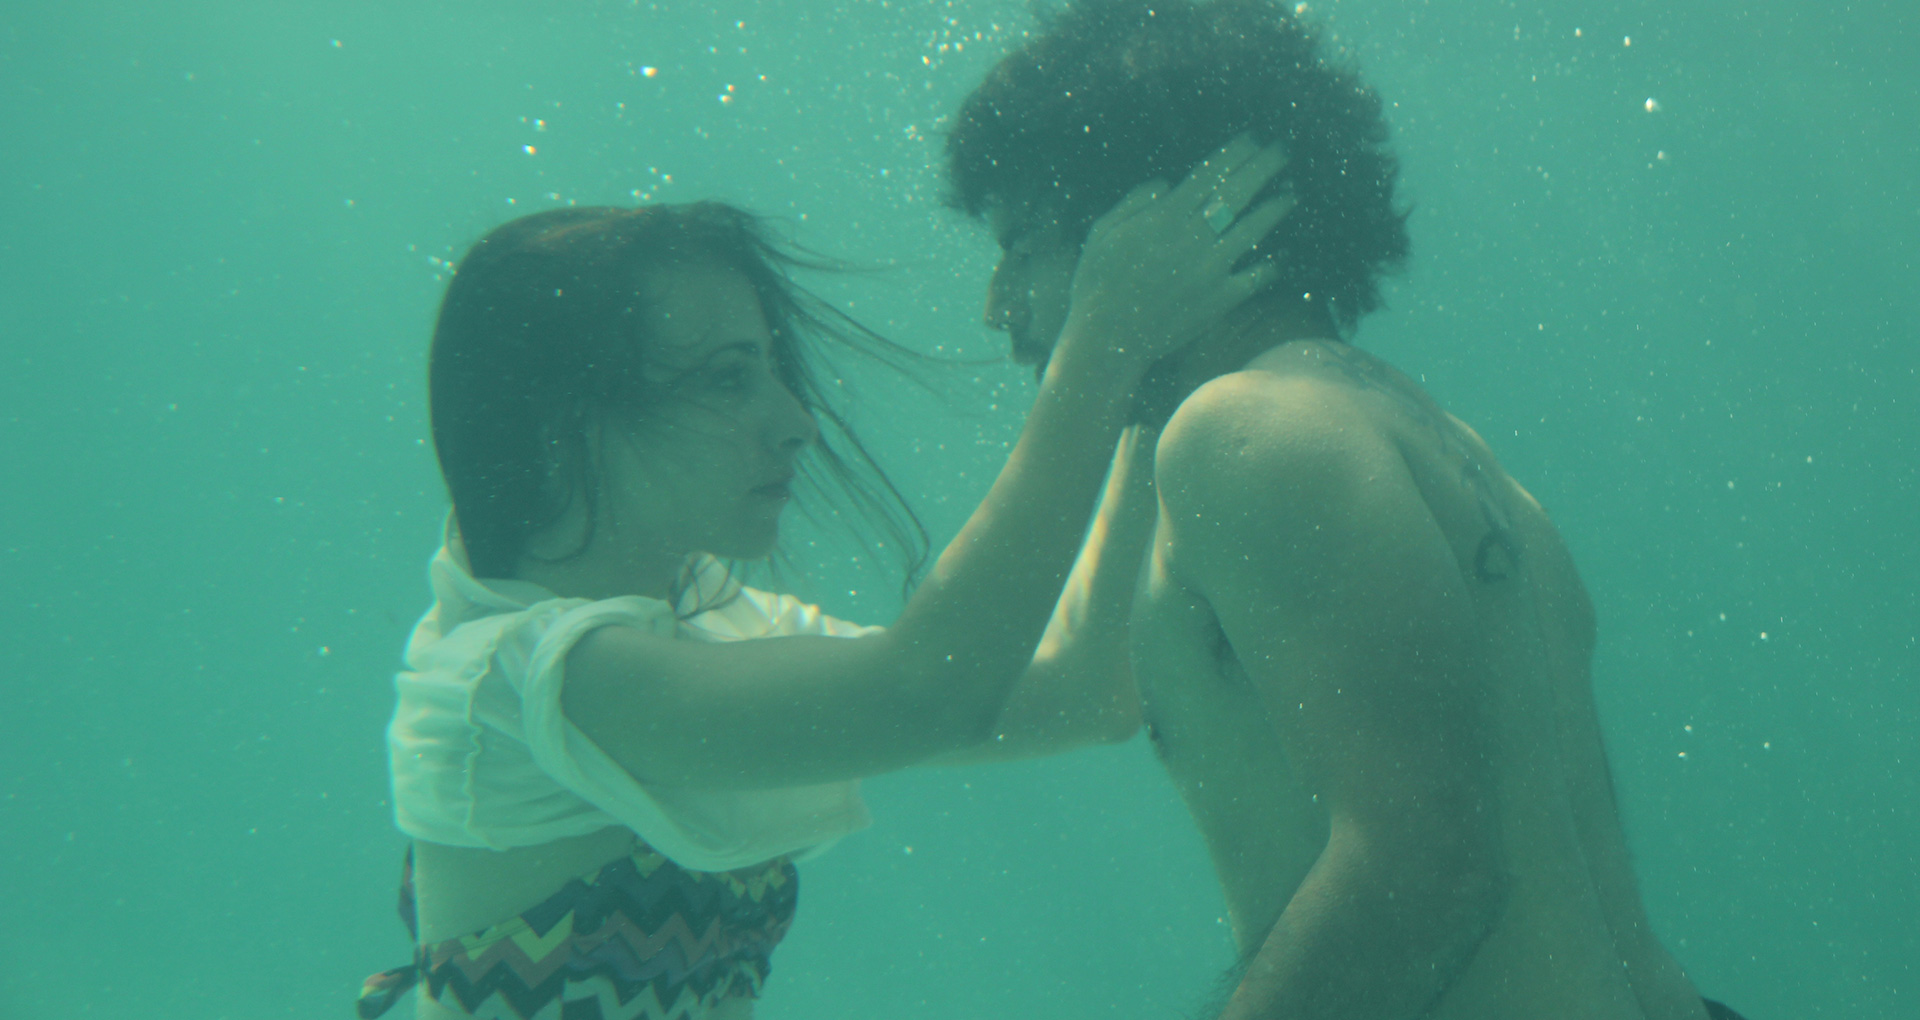 the young woman and the guy under water